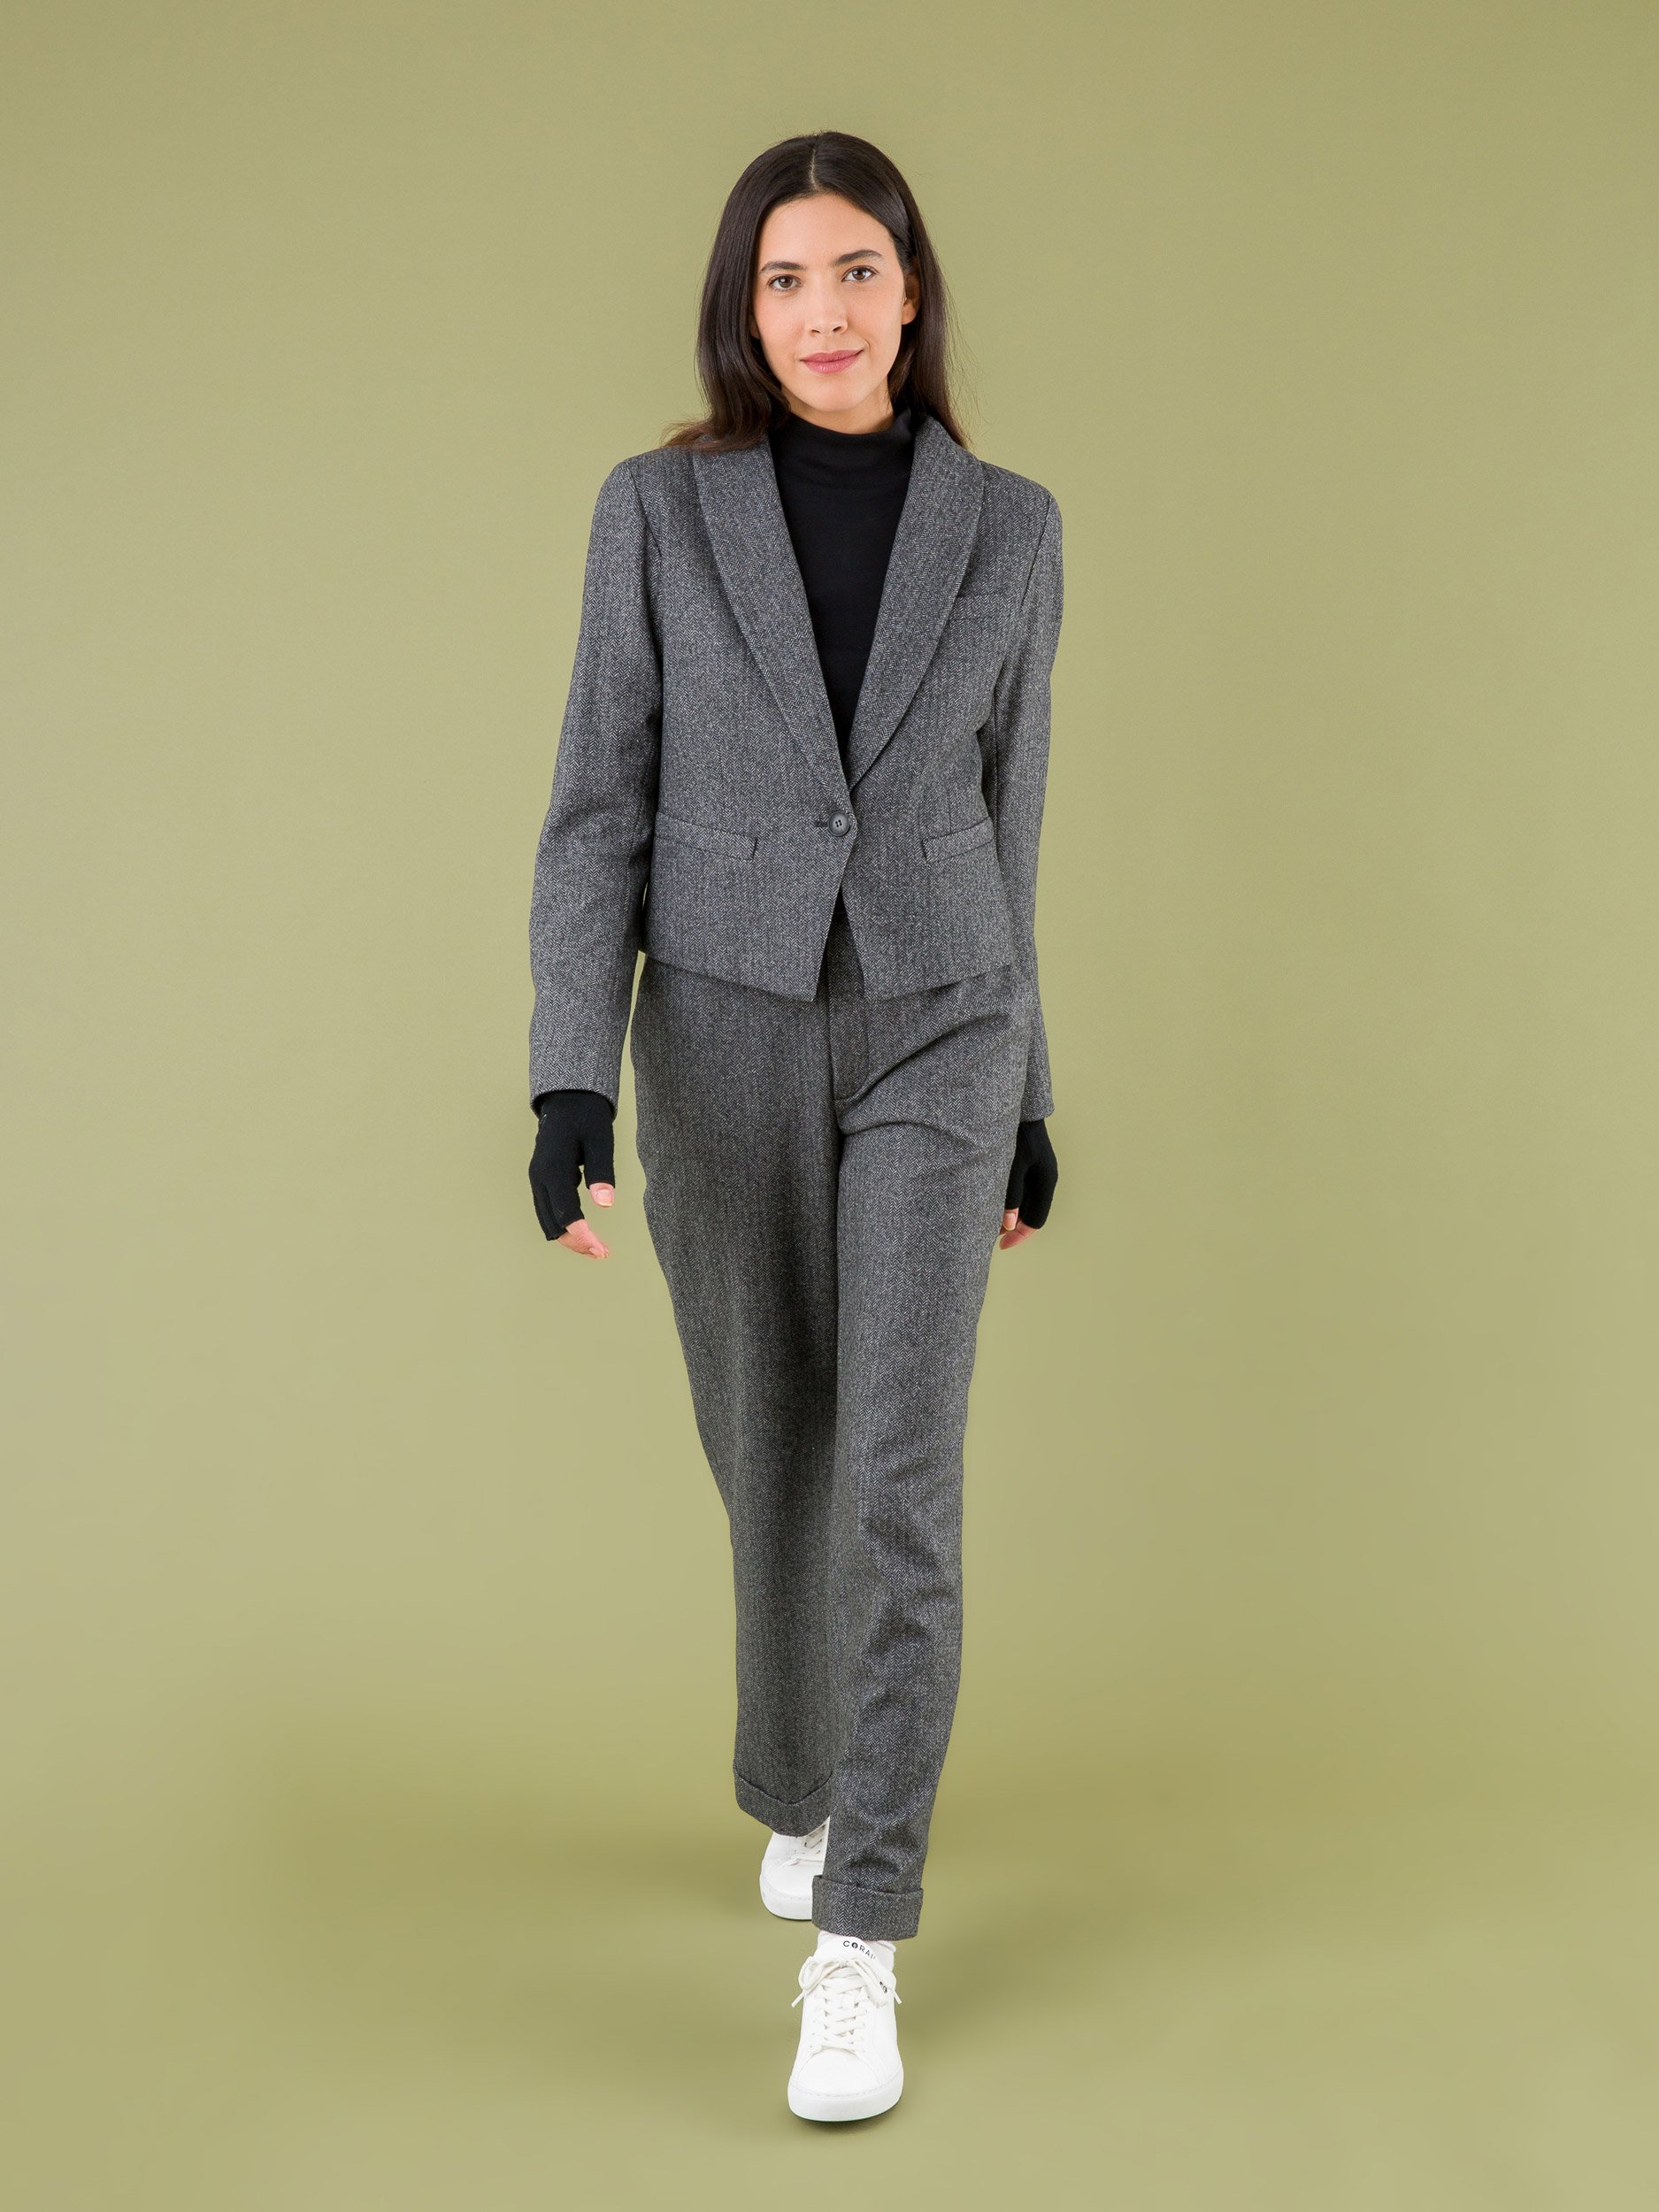 Women in suits: Show your power and style - Chinadaily.com.cn